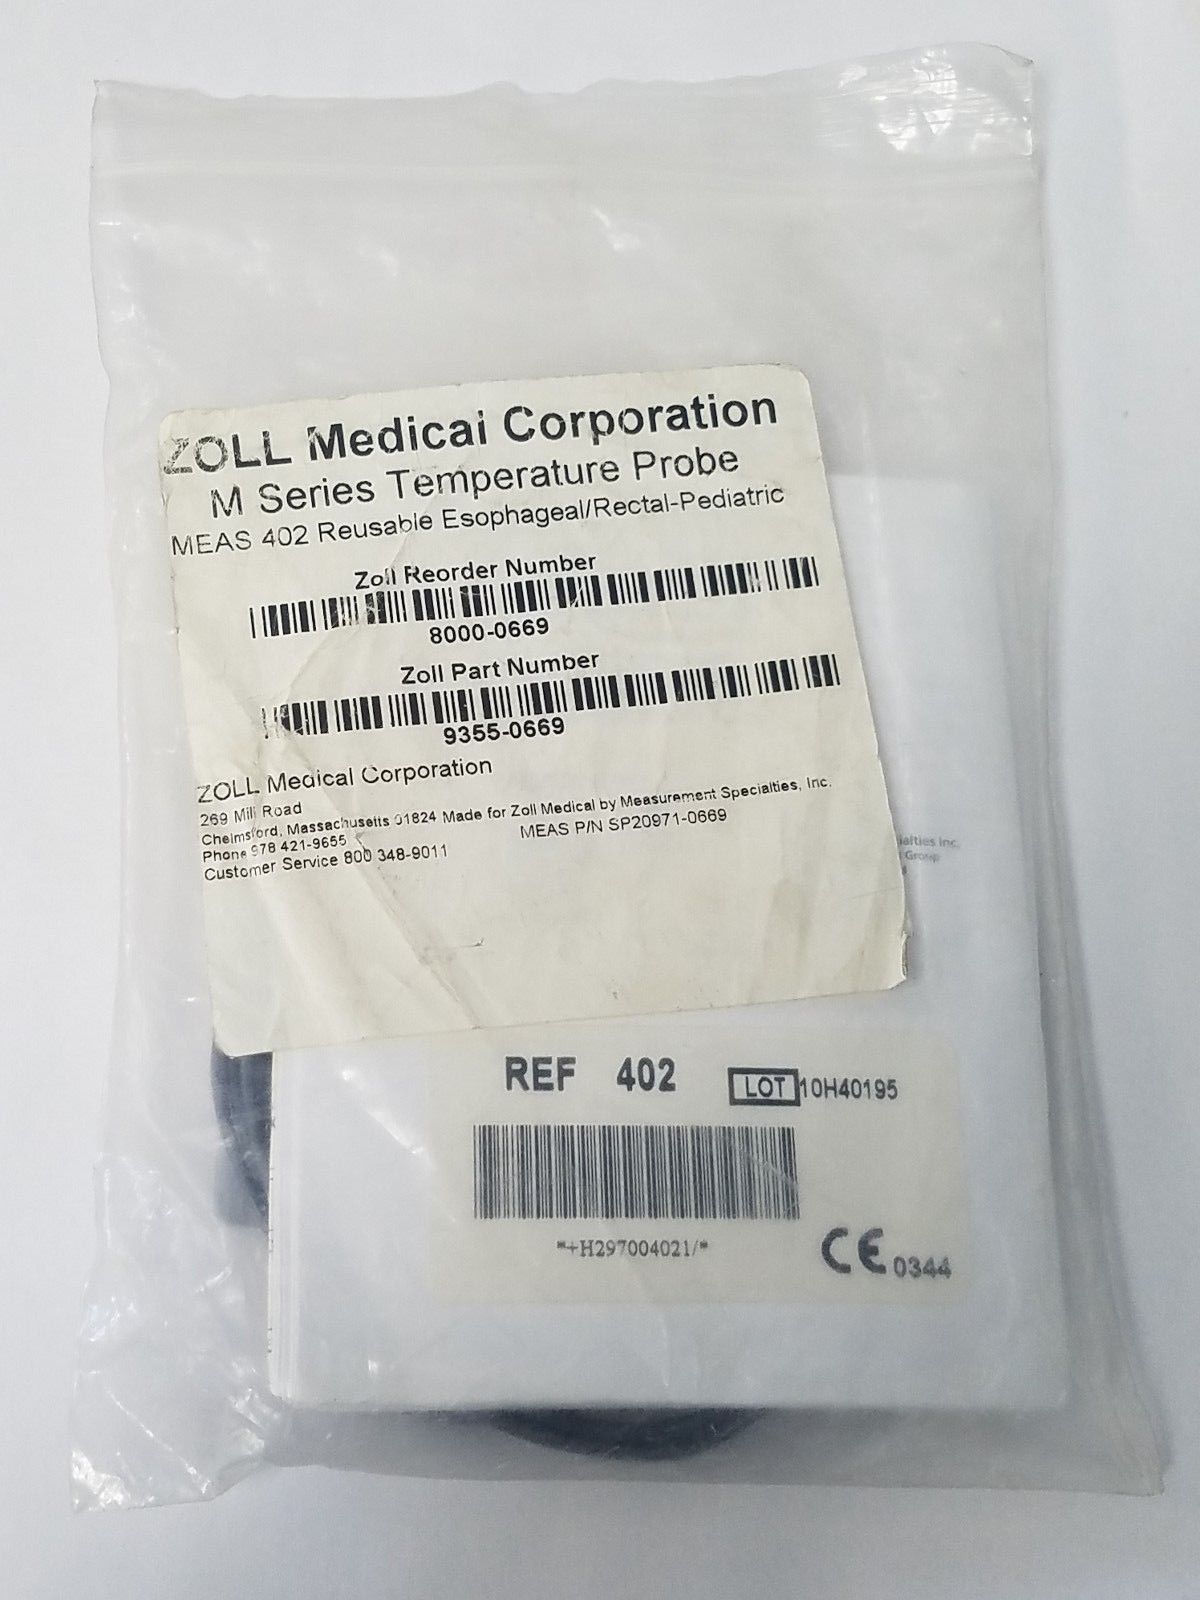 Zoll M Series Temperature Probe MEAS 402 Reusable Esophageal / Rectal Pediatric DIAGNOSTIC ULTRASOUND MACHINES FOR SALE